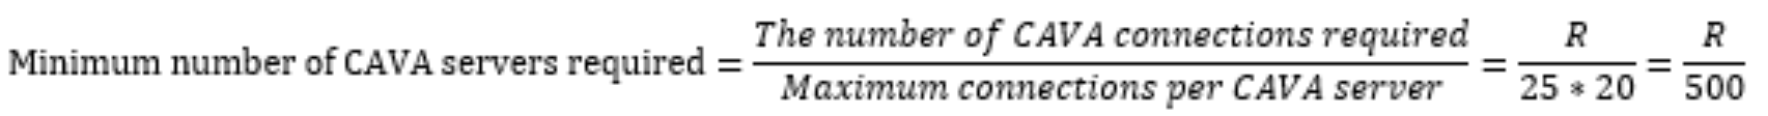 Minimum number of CAVA servers required = (The number of CAVA connections required) divided by the (Maximum connections per CAVA server) = R divided by 25 times 20 =R divided by 500.